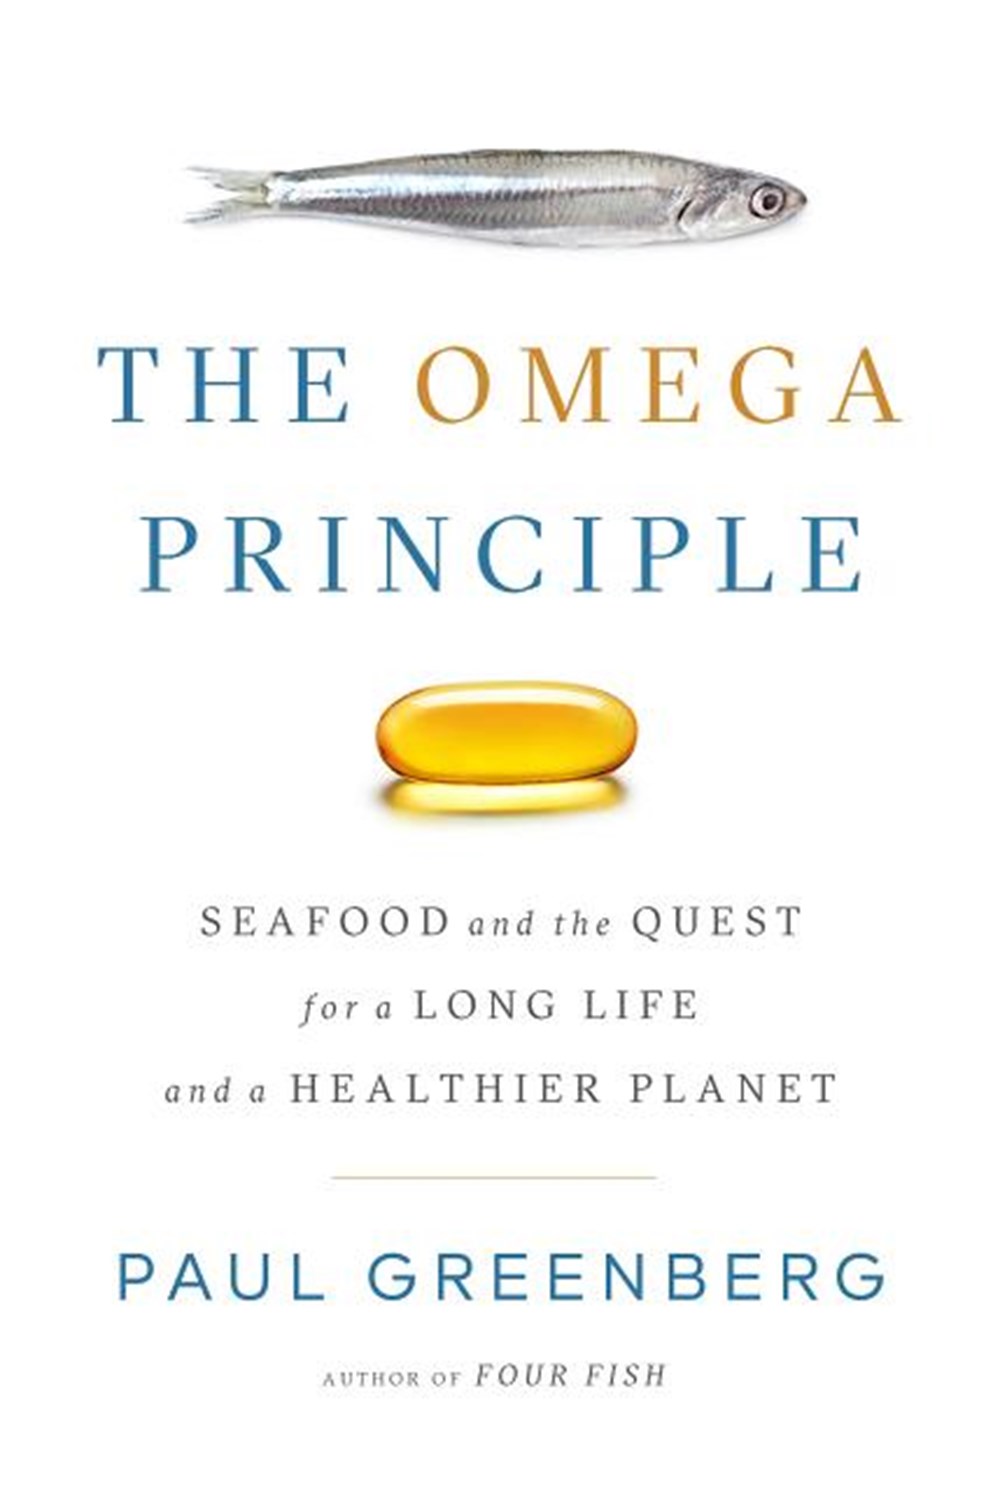 Omega Principle: Seafood and the Quest for a Long Life and a Healthier Planet